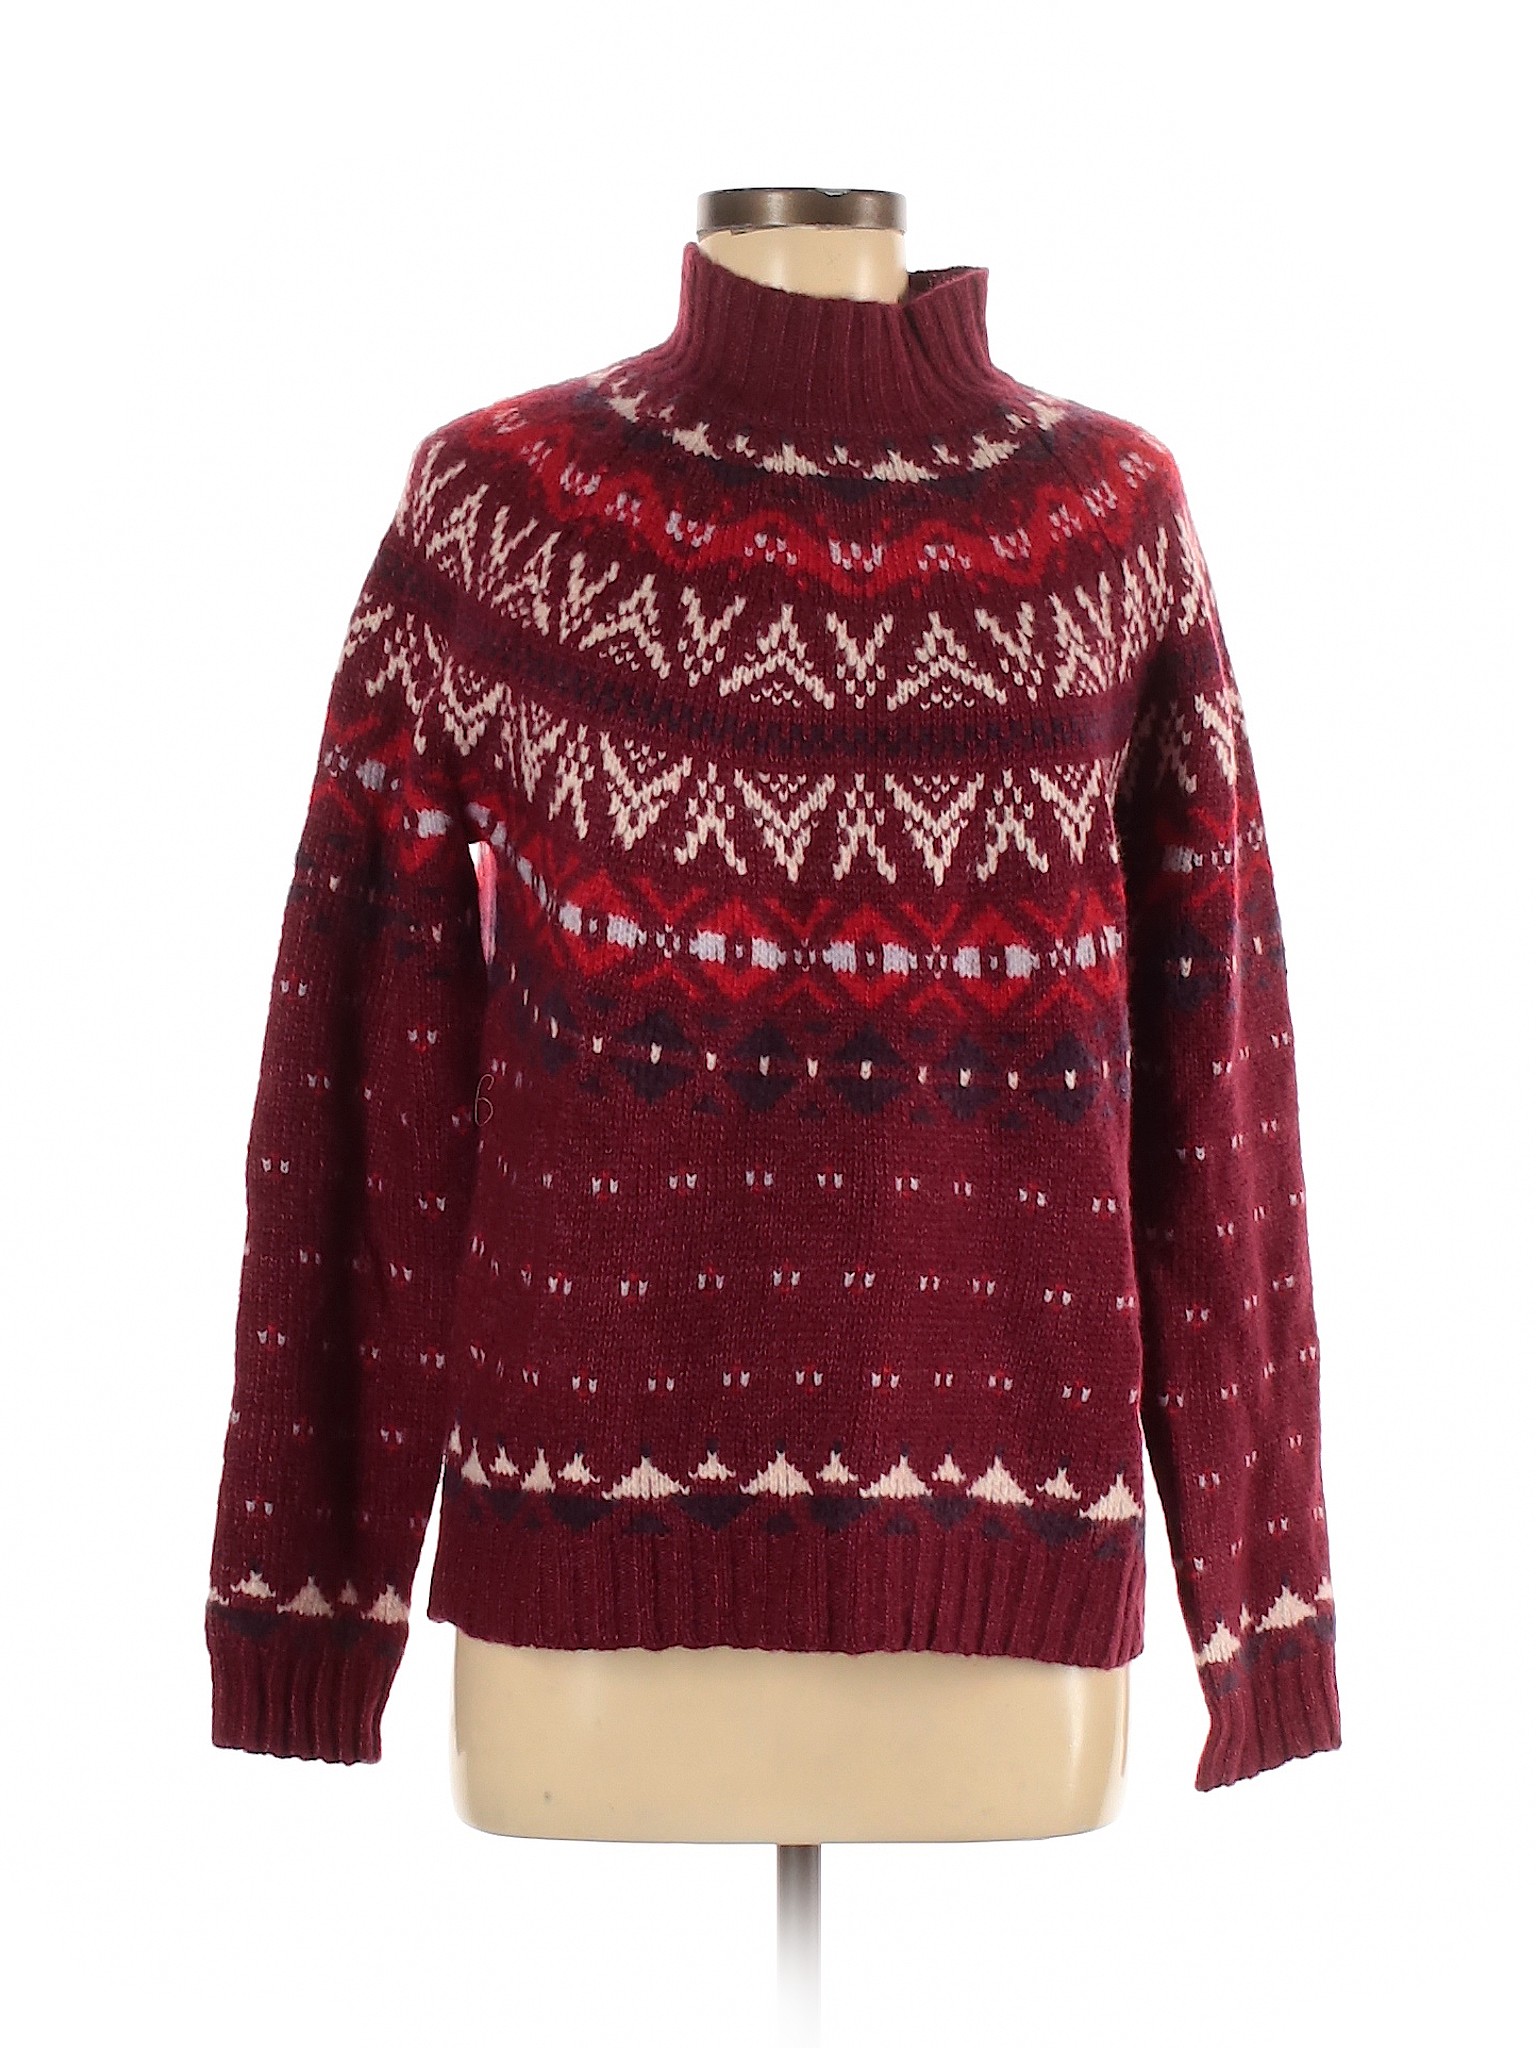 American Eagle Maroon Cable Knit Side Zip Sweater 